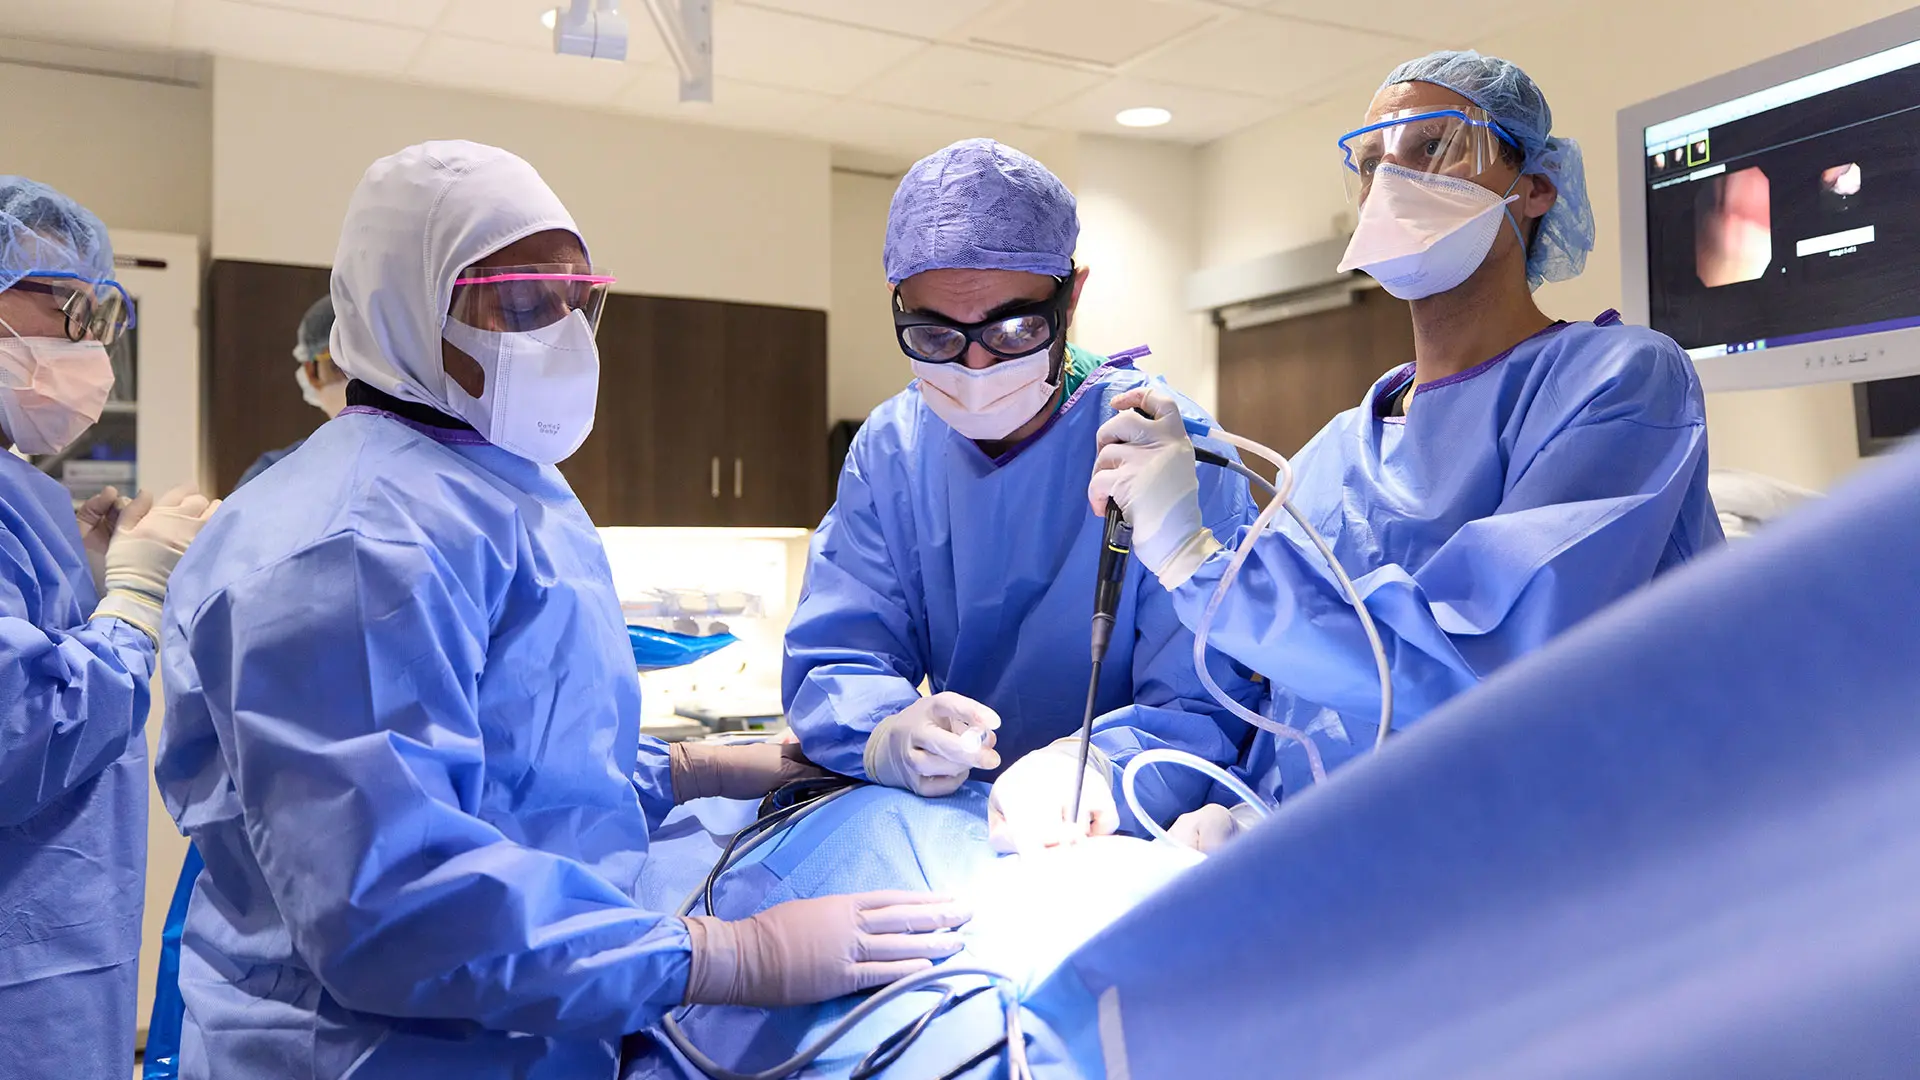 Udit S. Chaddha, MBBS (center), along with assistants Christian Lo Cascio, MD (Interventional Pulmonology fellow; right) and Idayat Brimah, MD (Pulmonary Critical Care fellow; left), and endoscopy technician Bongick Jang (far left), performing a pleuroscopy in the Mount Sinai West endoscopy suite. 